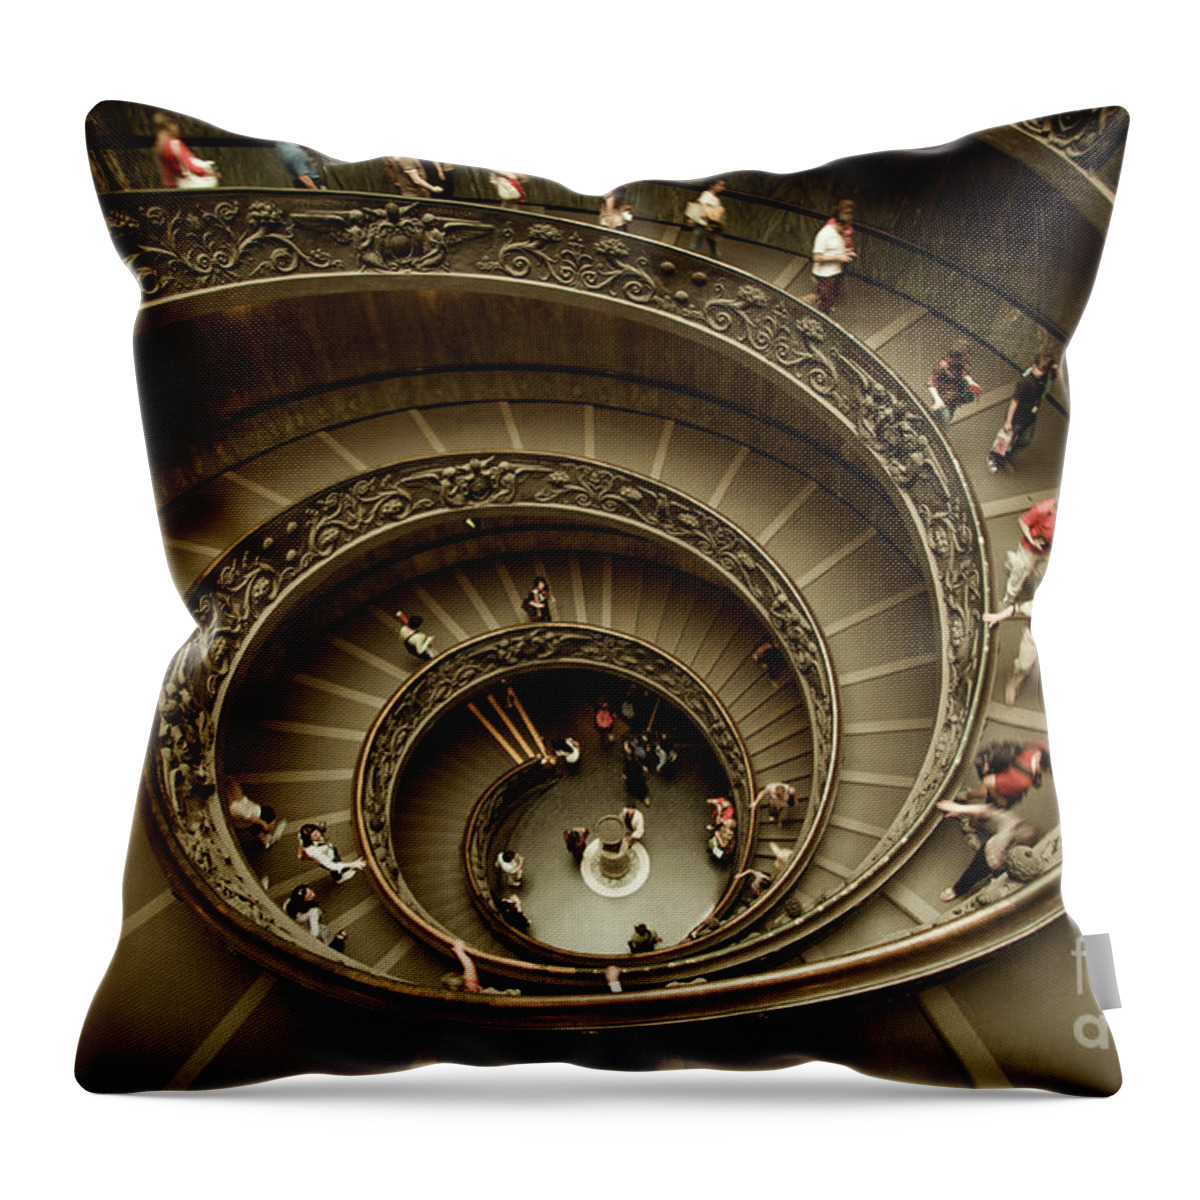 Spiral Staircase Throw Pillow featuring the photograph Vatican Museums Spiral Staircase by Stefano Senise